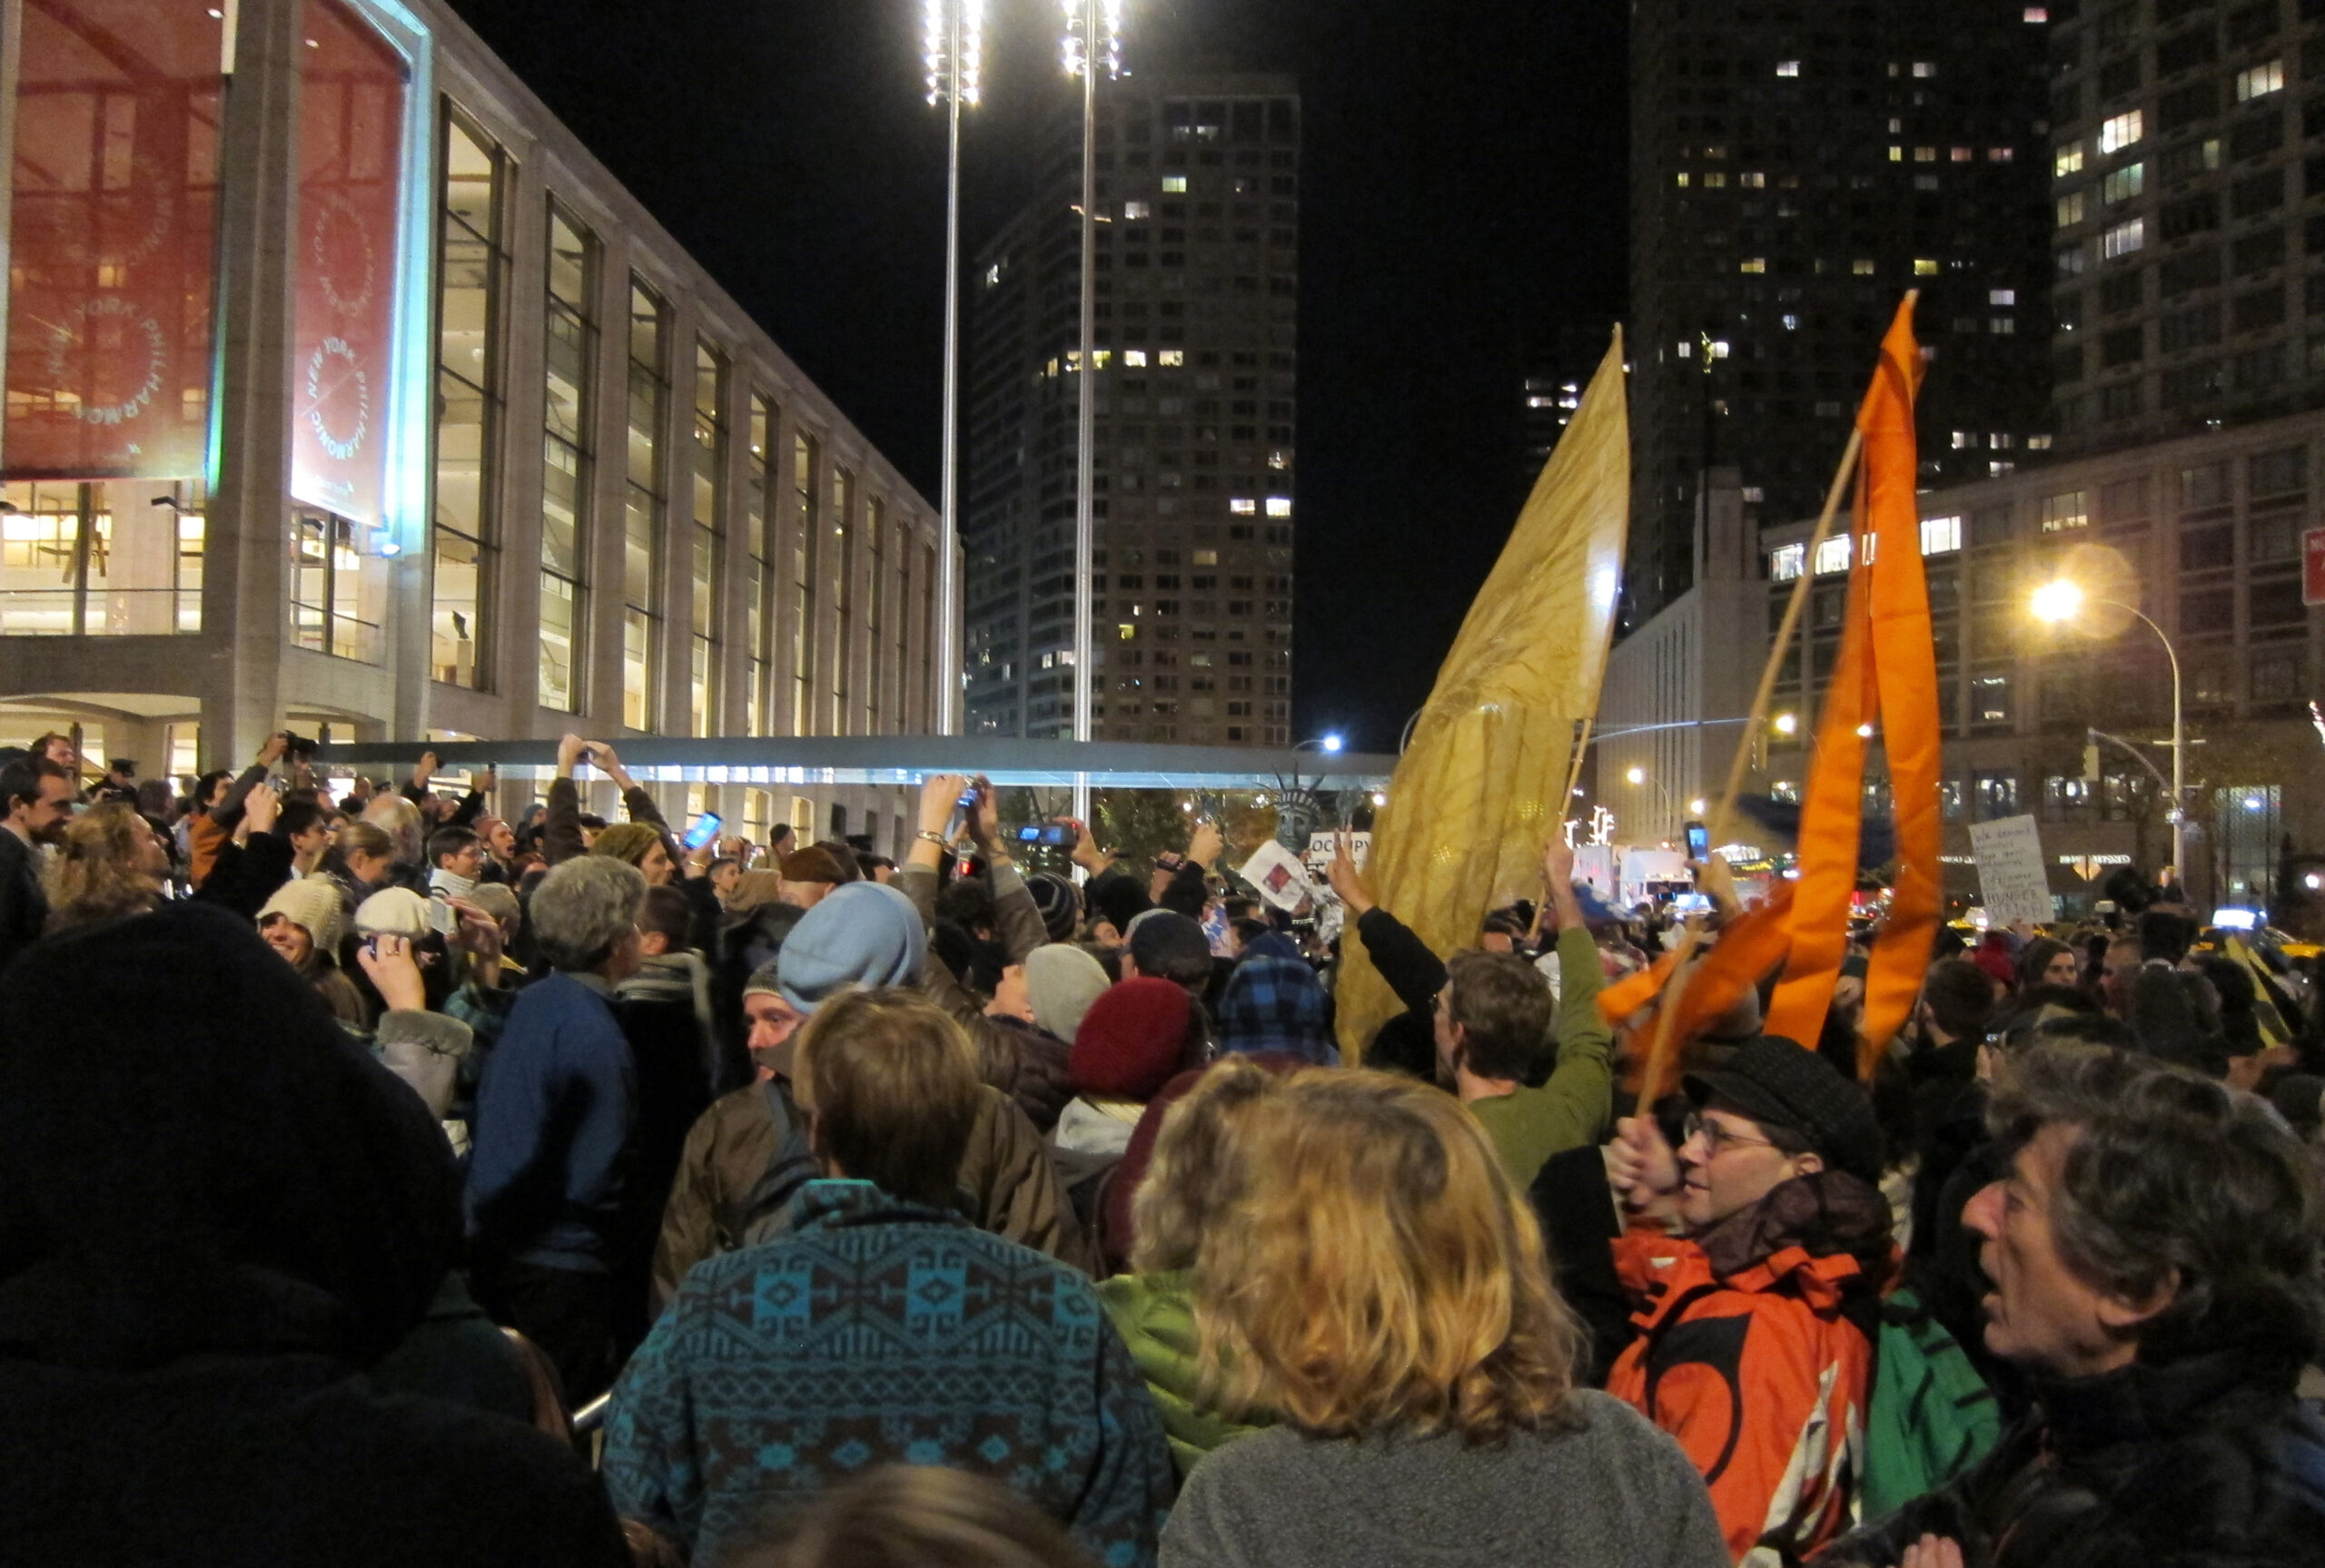 Occupy Wall Street protesters gathered outside on Lincoln Center Plaza